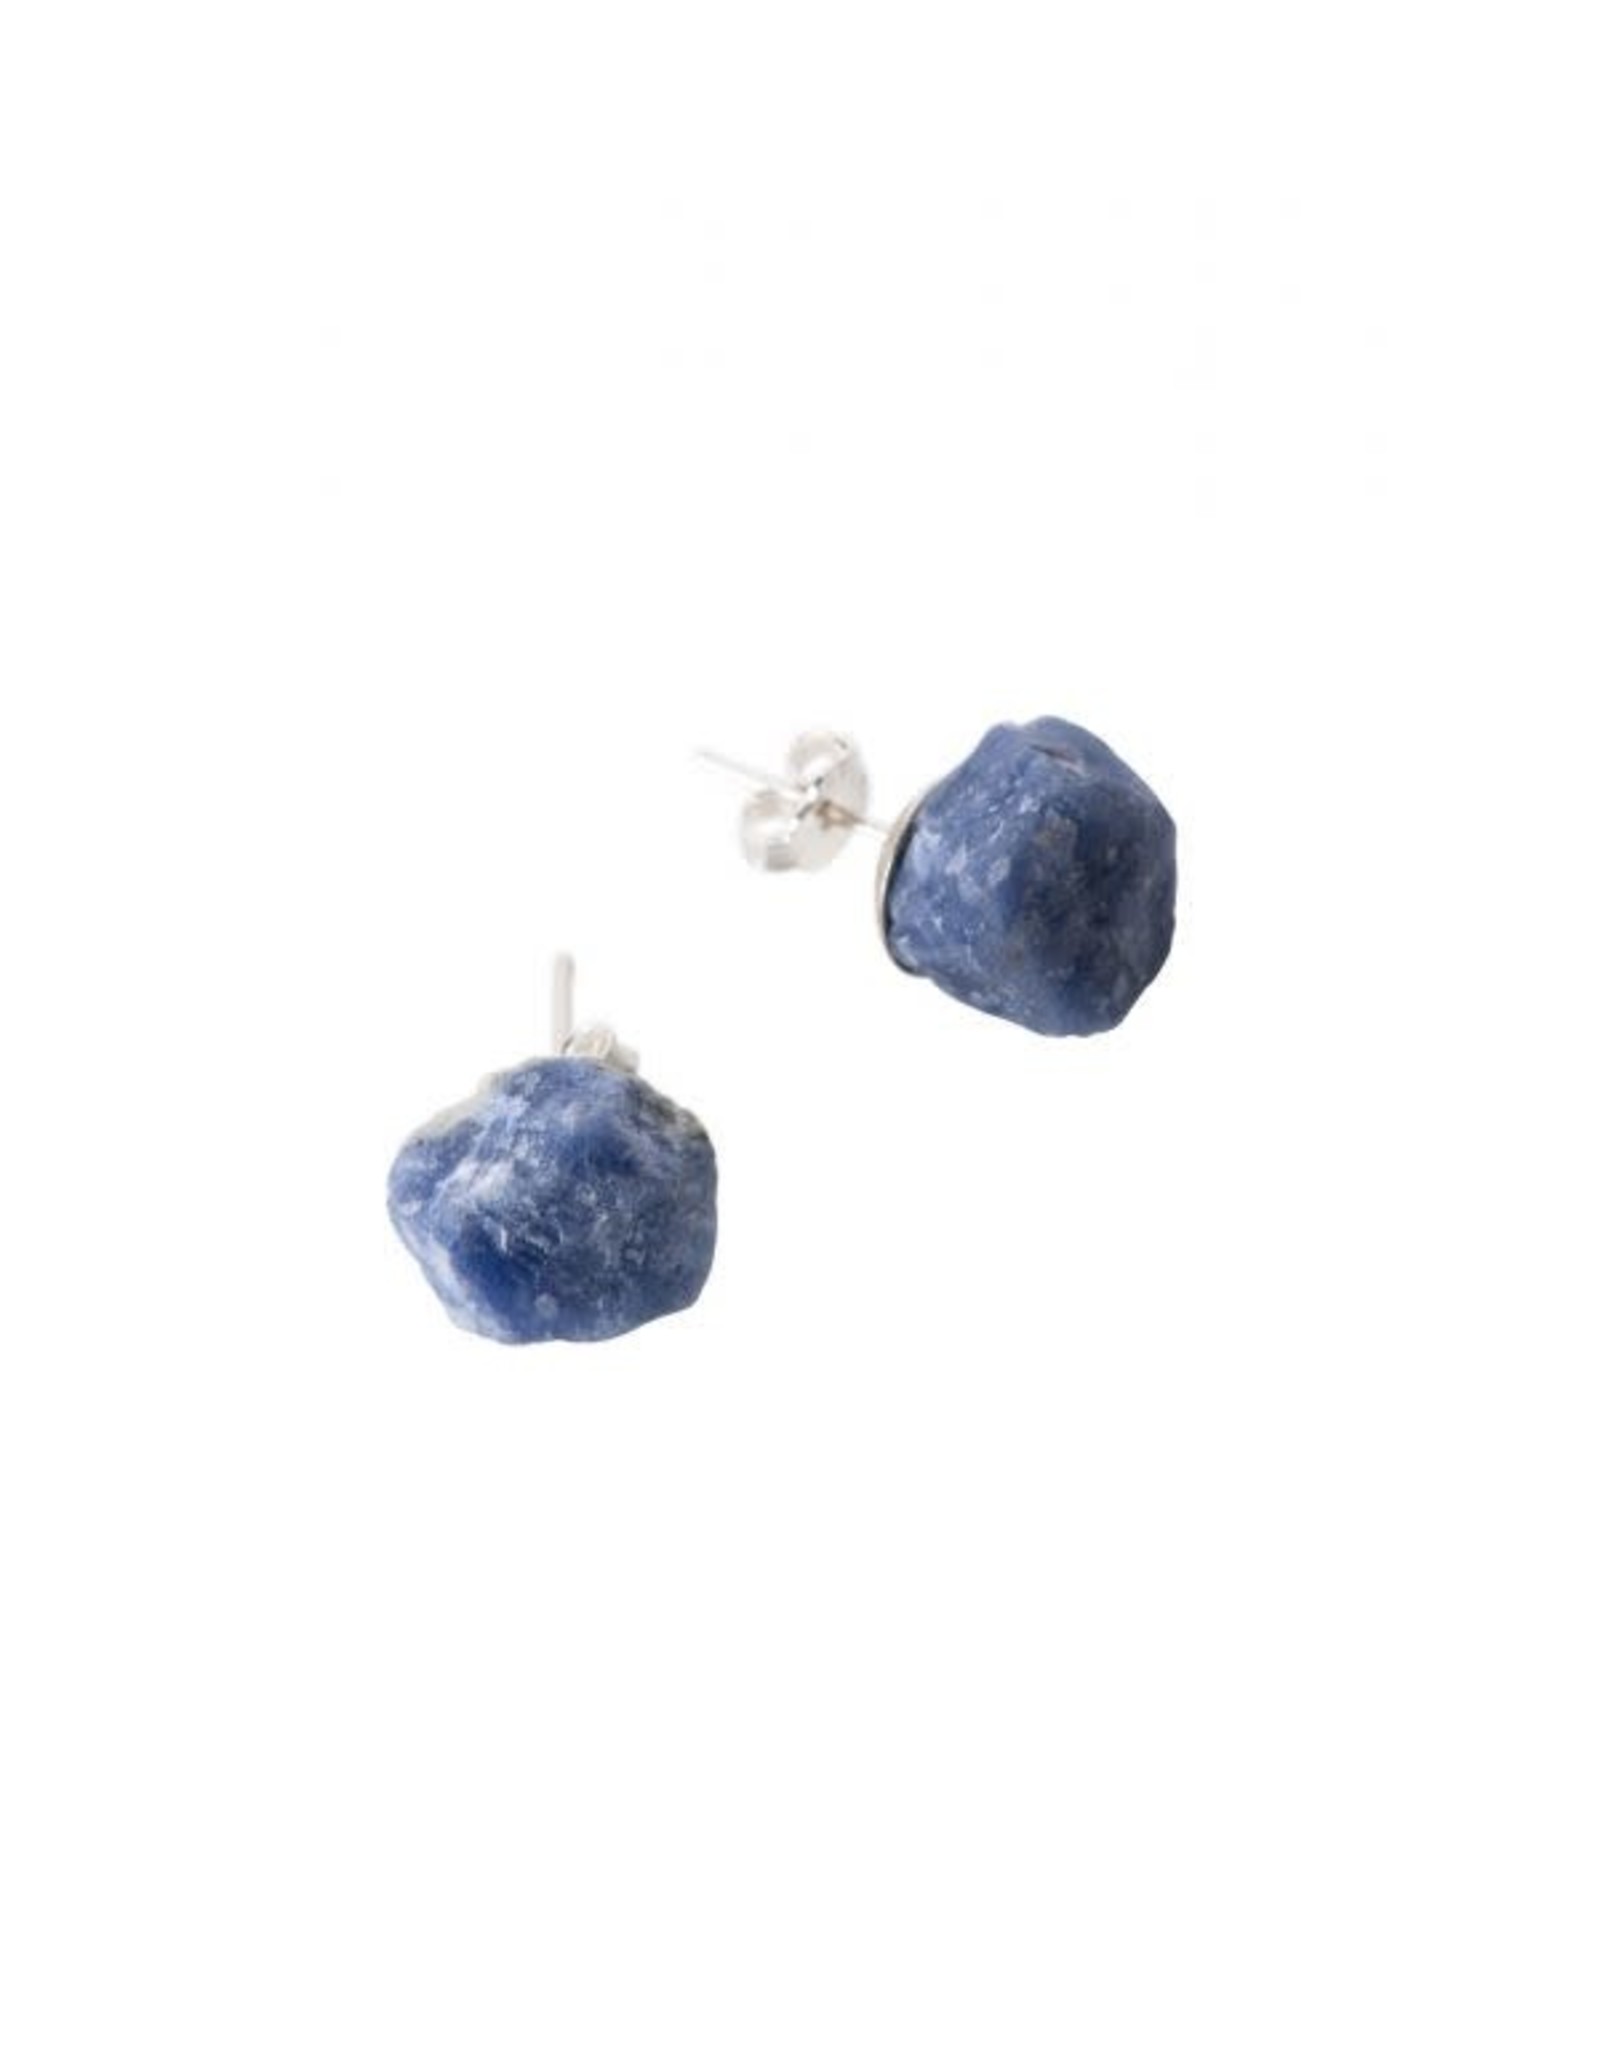 Trade roots Rough Stone Sterling Earrings, Sodalite